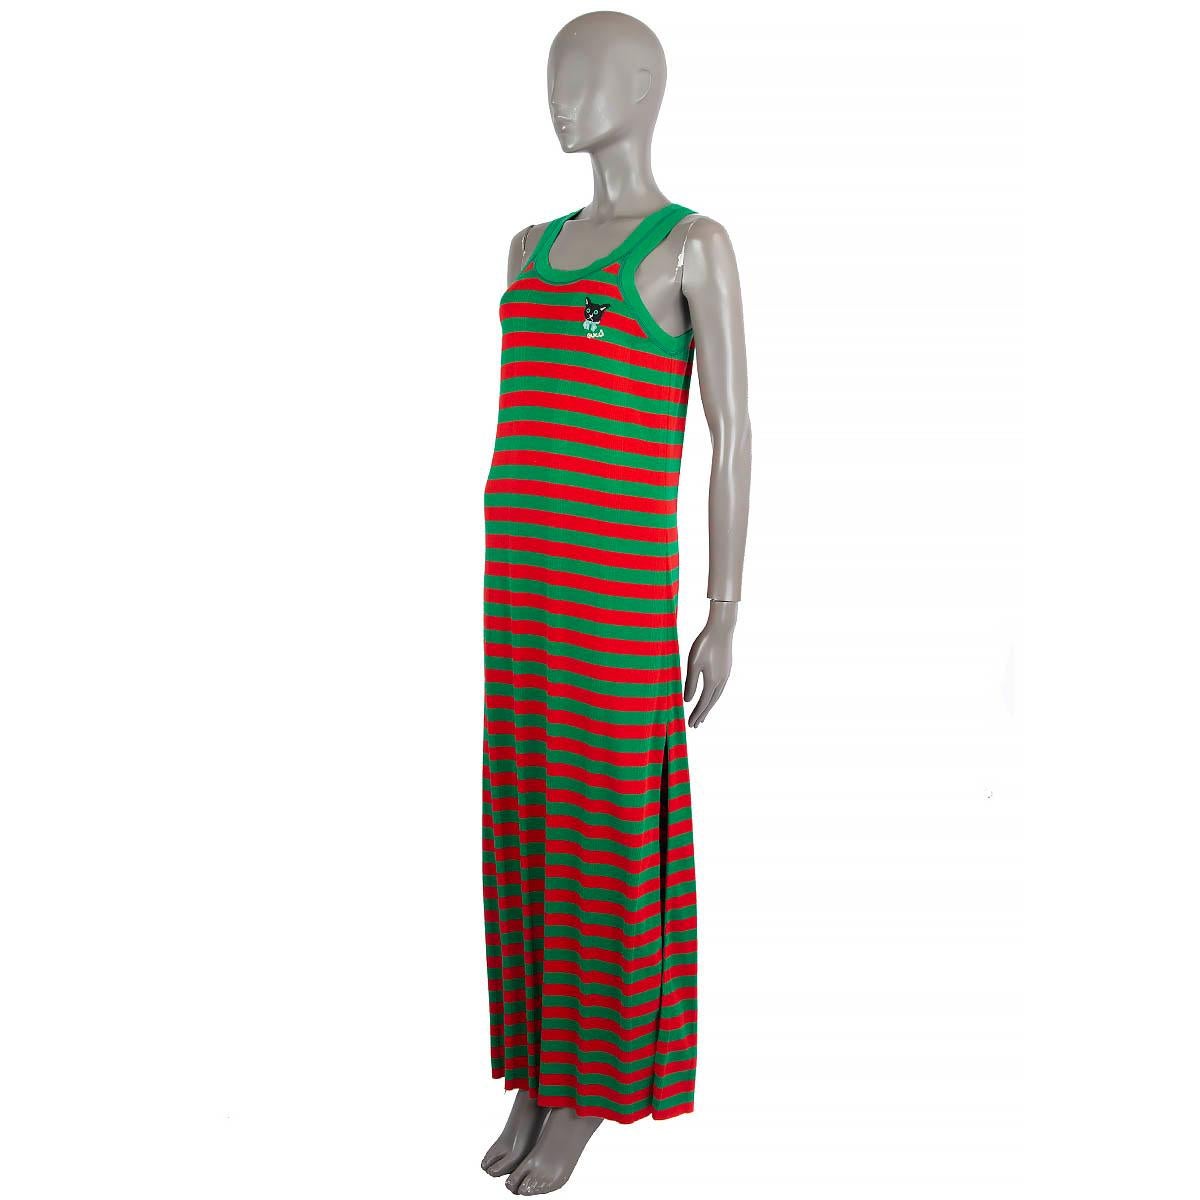 100% authentic Gucci maxi dress in green and red striped cotton jersey (100%) missing tag. Features a scoop neck and cat patch on the front. Has been worn and is in excellent condition.

2021 Spring/Summer

Measurements
Tag Size	M
Size	M
Shoulder